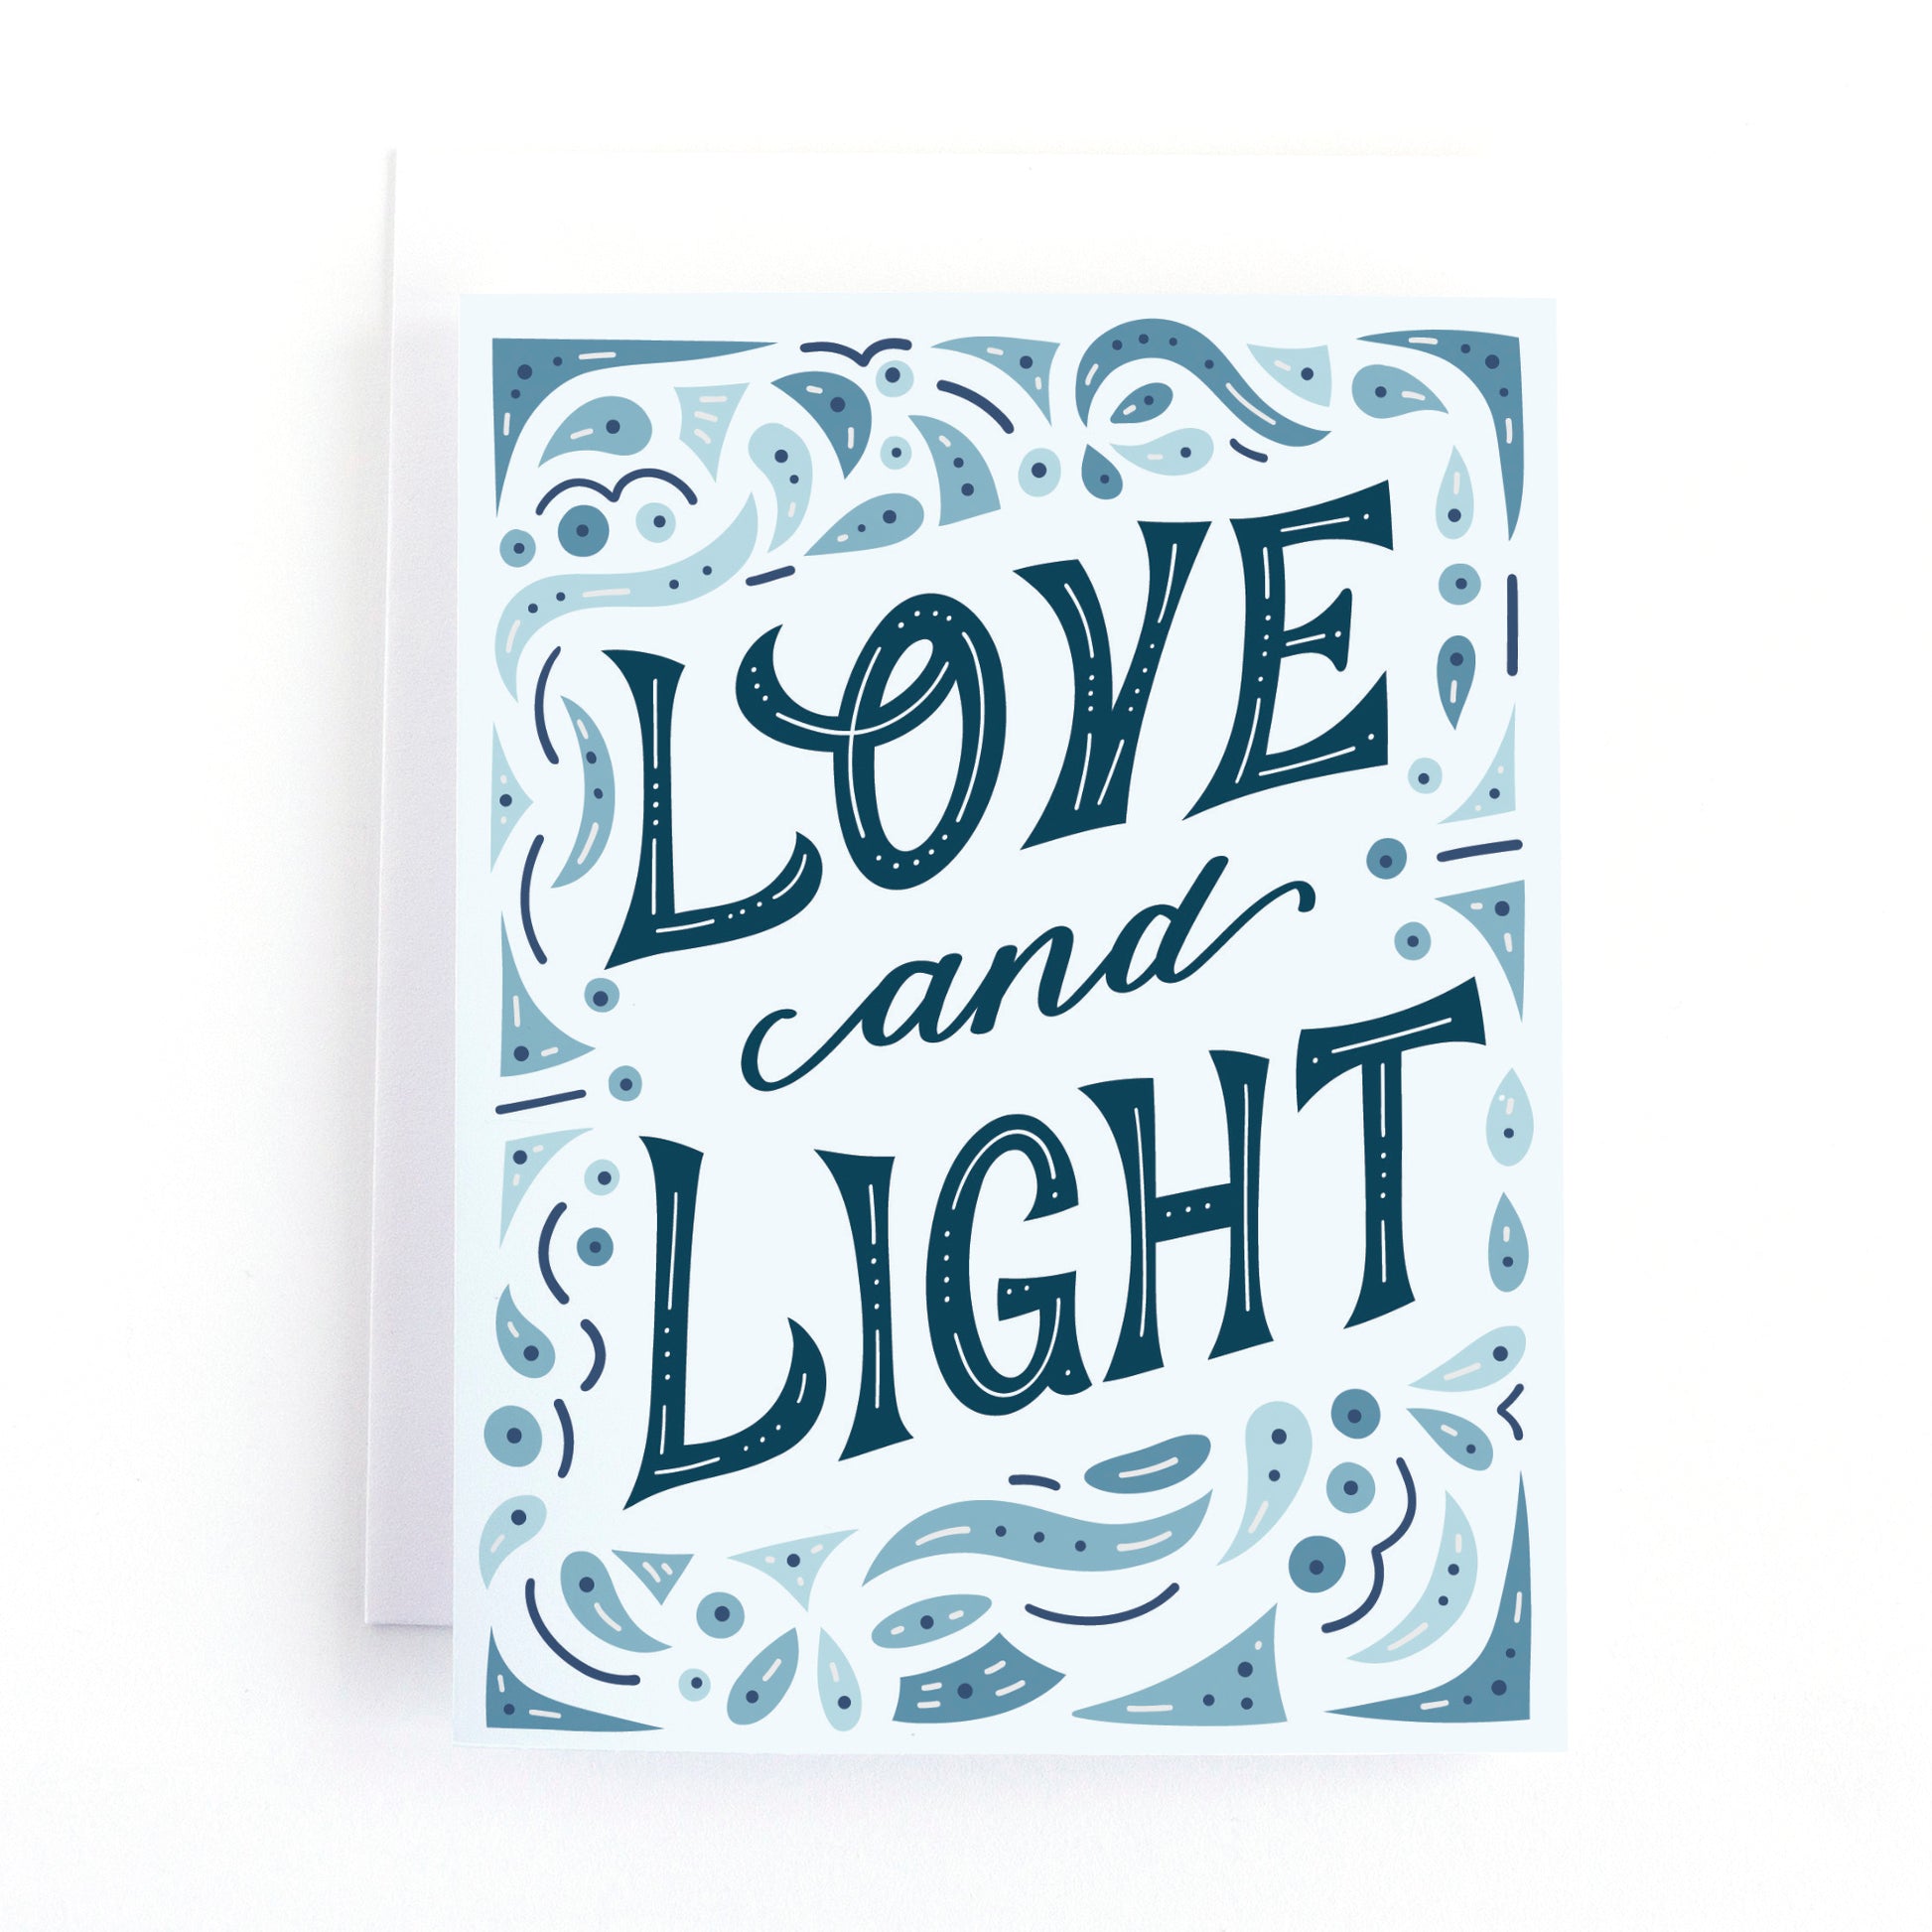 Hanukkah card featuring the message love and light surrounded by an intracate border of shapes and lines